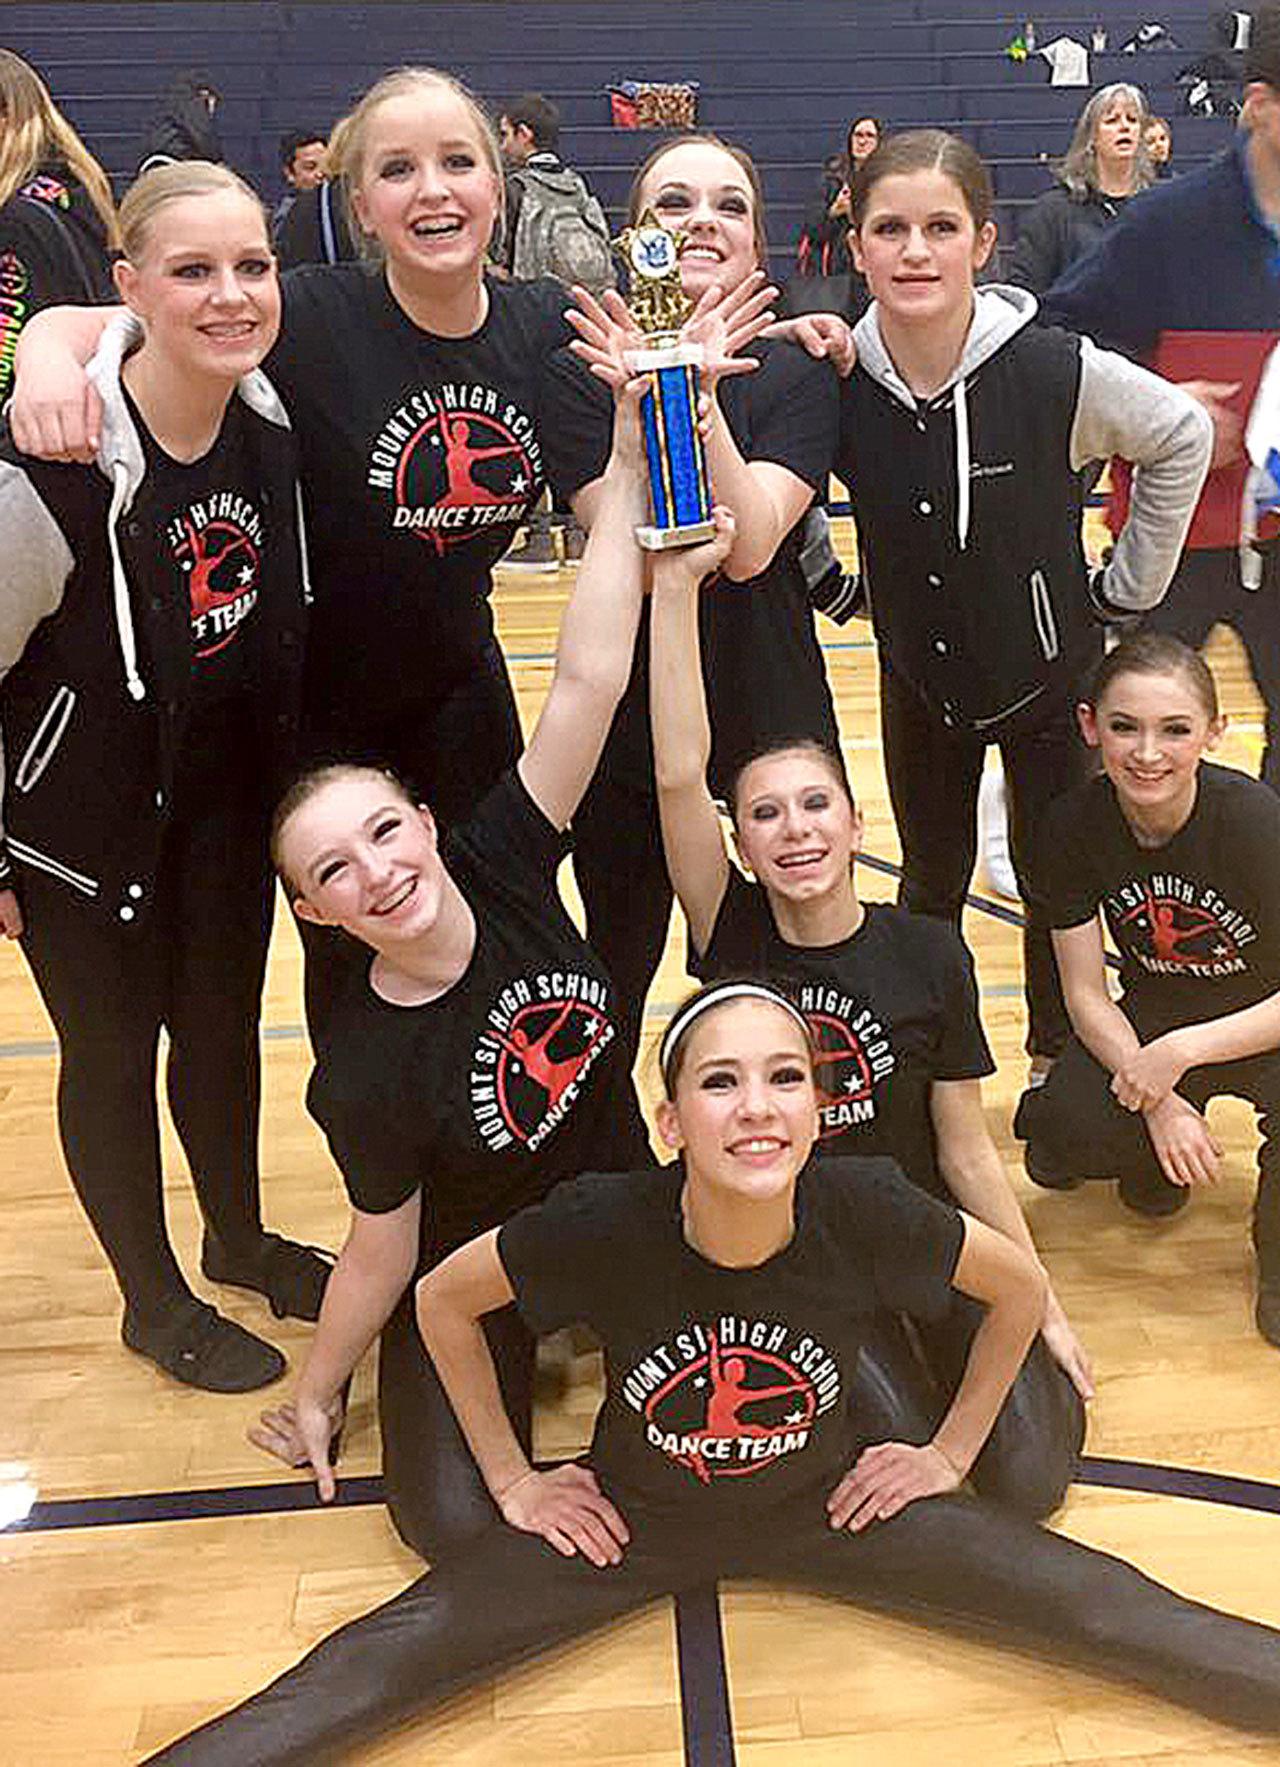 Courtesy Photo                                Mount Si High School’s dance team celebrates their second place finish in the military category at the Bellevue High School dance competition Dec. 10.